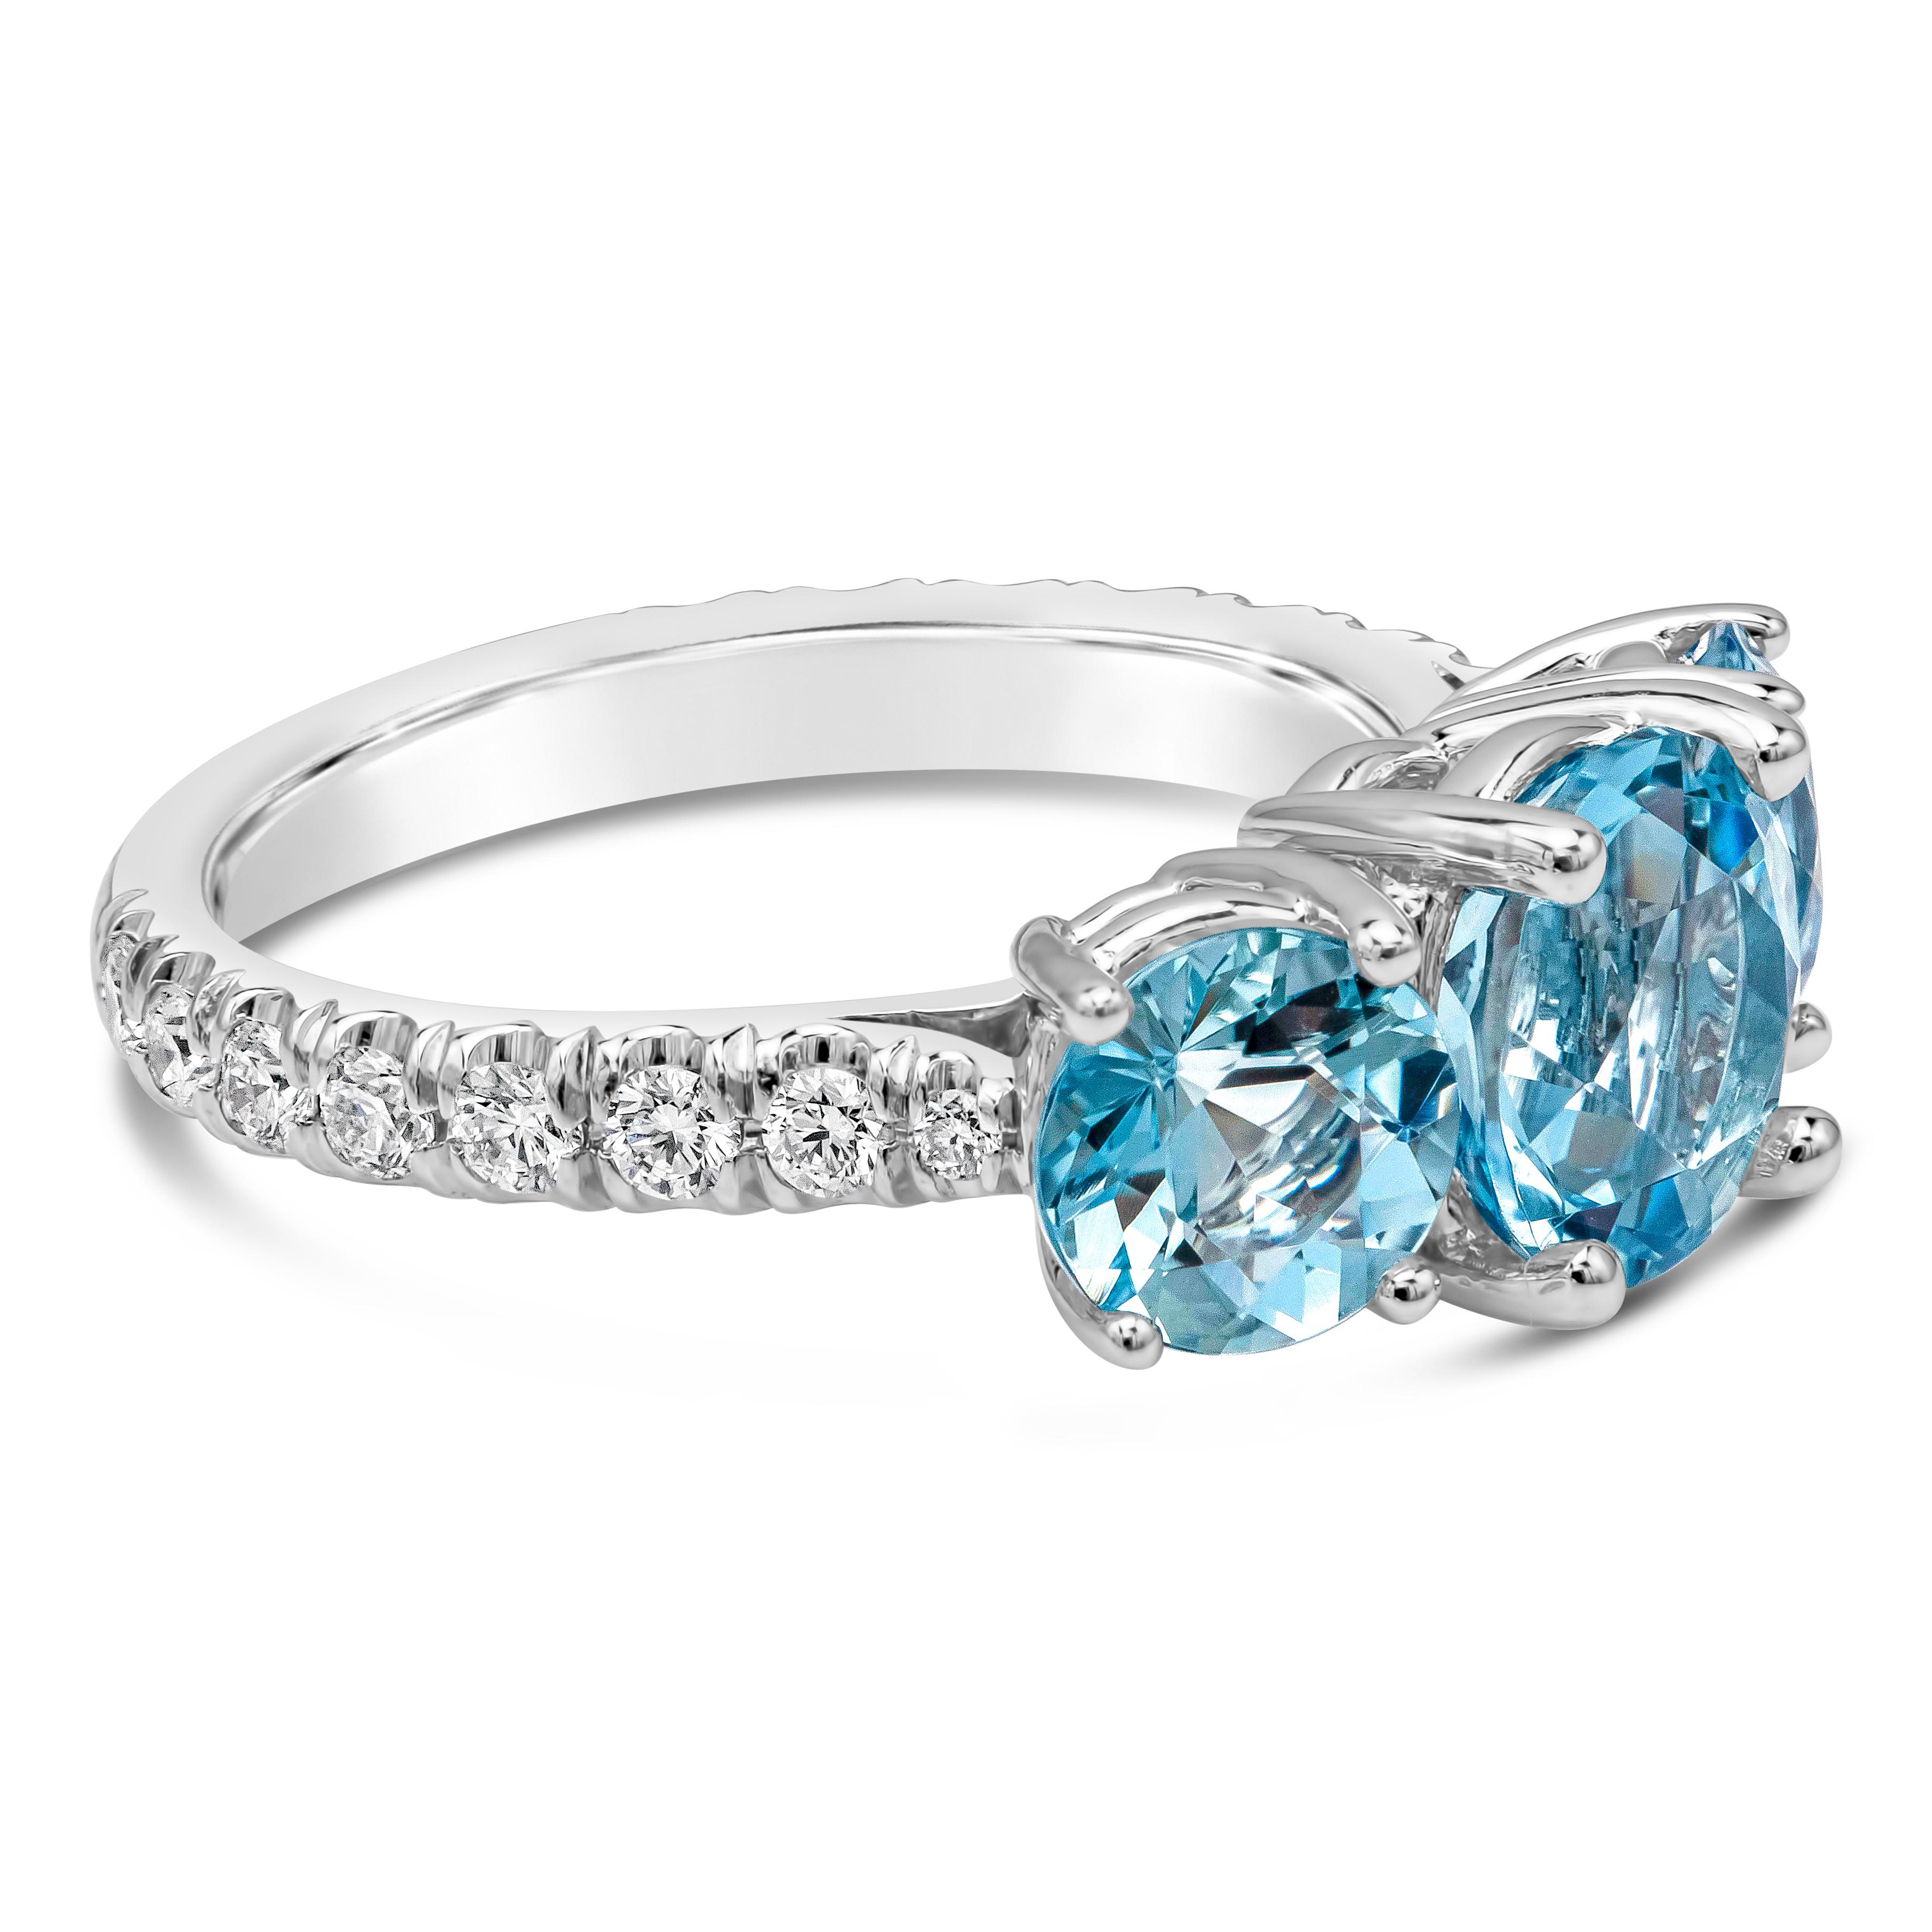 A gorgeous three stone gemstone engagement ring features three round cut blue aquamarine weighing 2.94 carats total VS-VVS in Clarity, set in a classic four prong basket setting. Shank is diamond encrusted in half eternity setting. Diamonds weigh